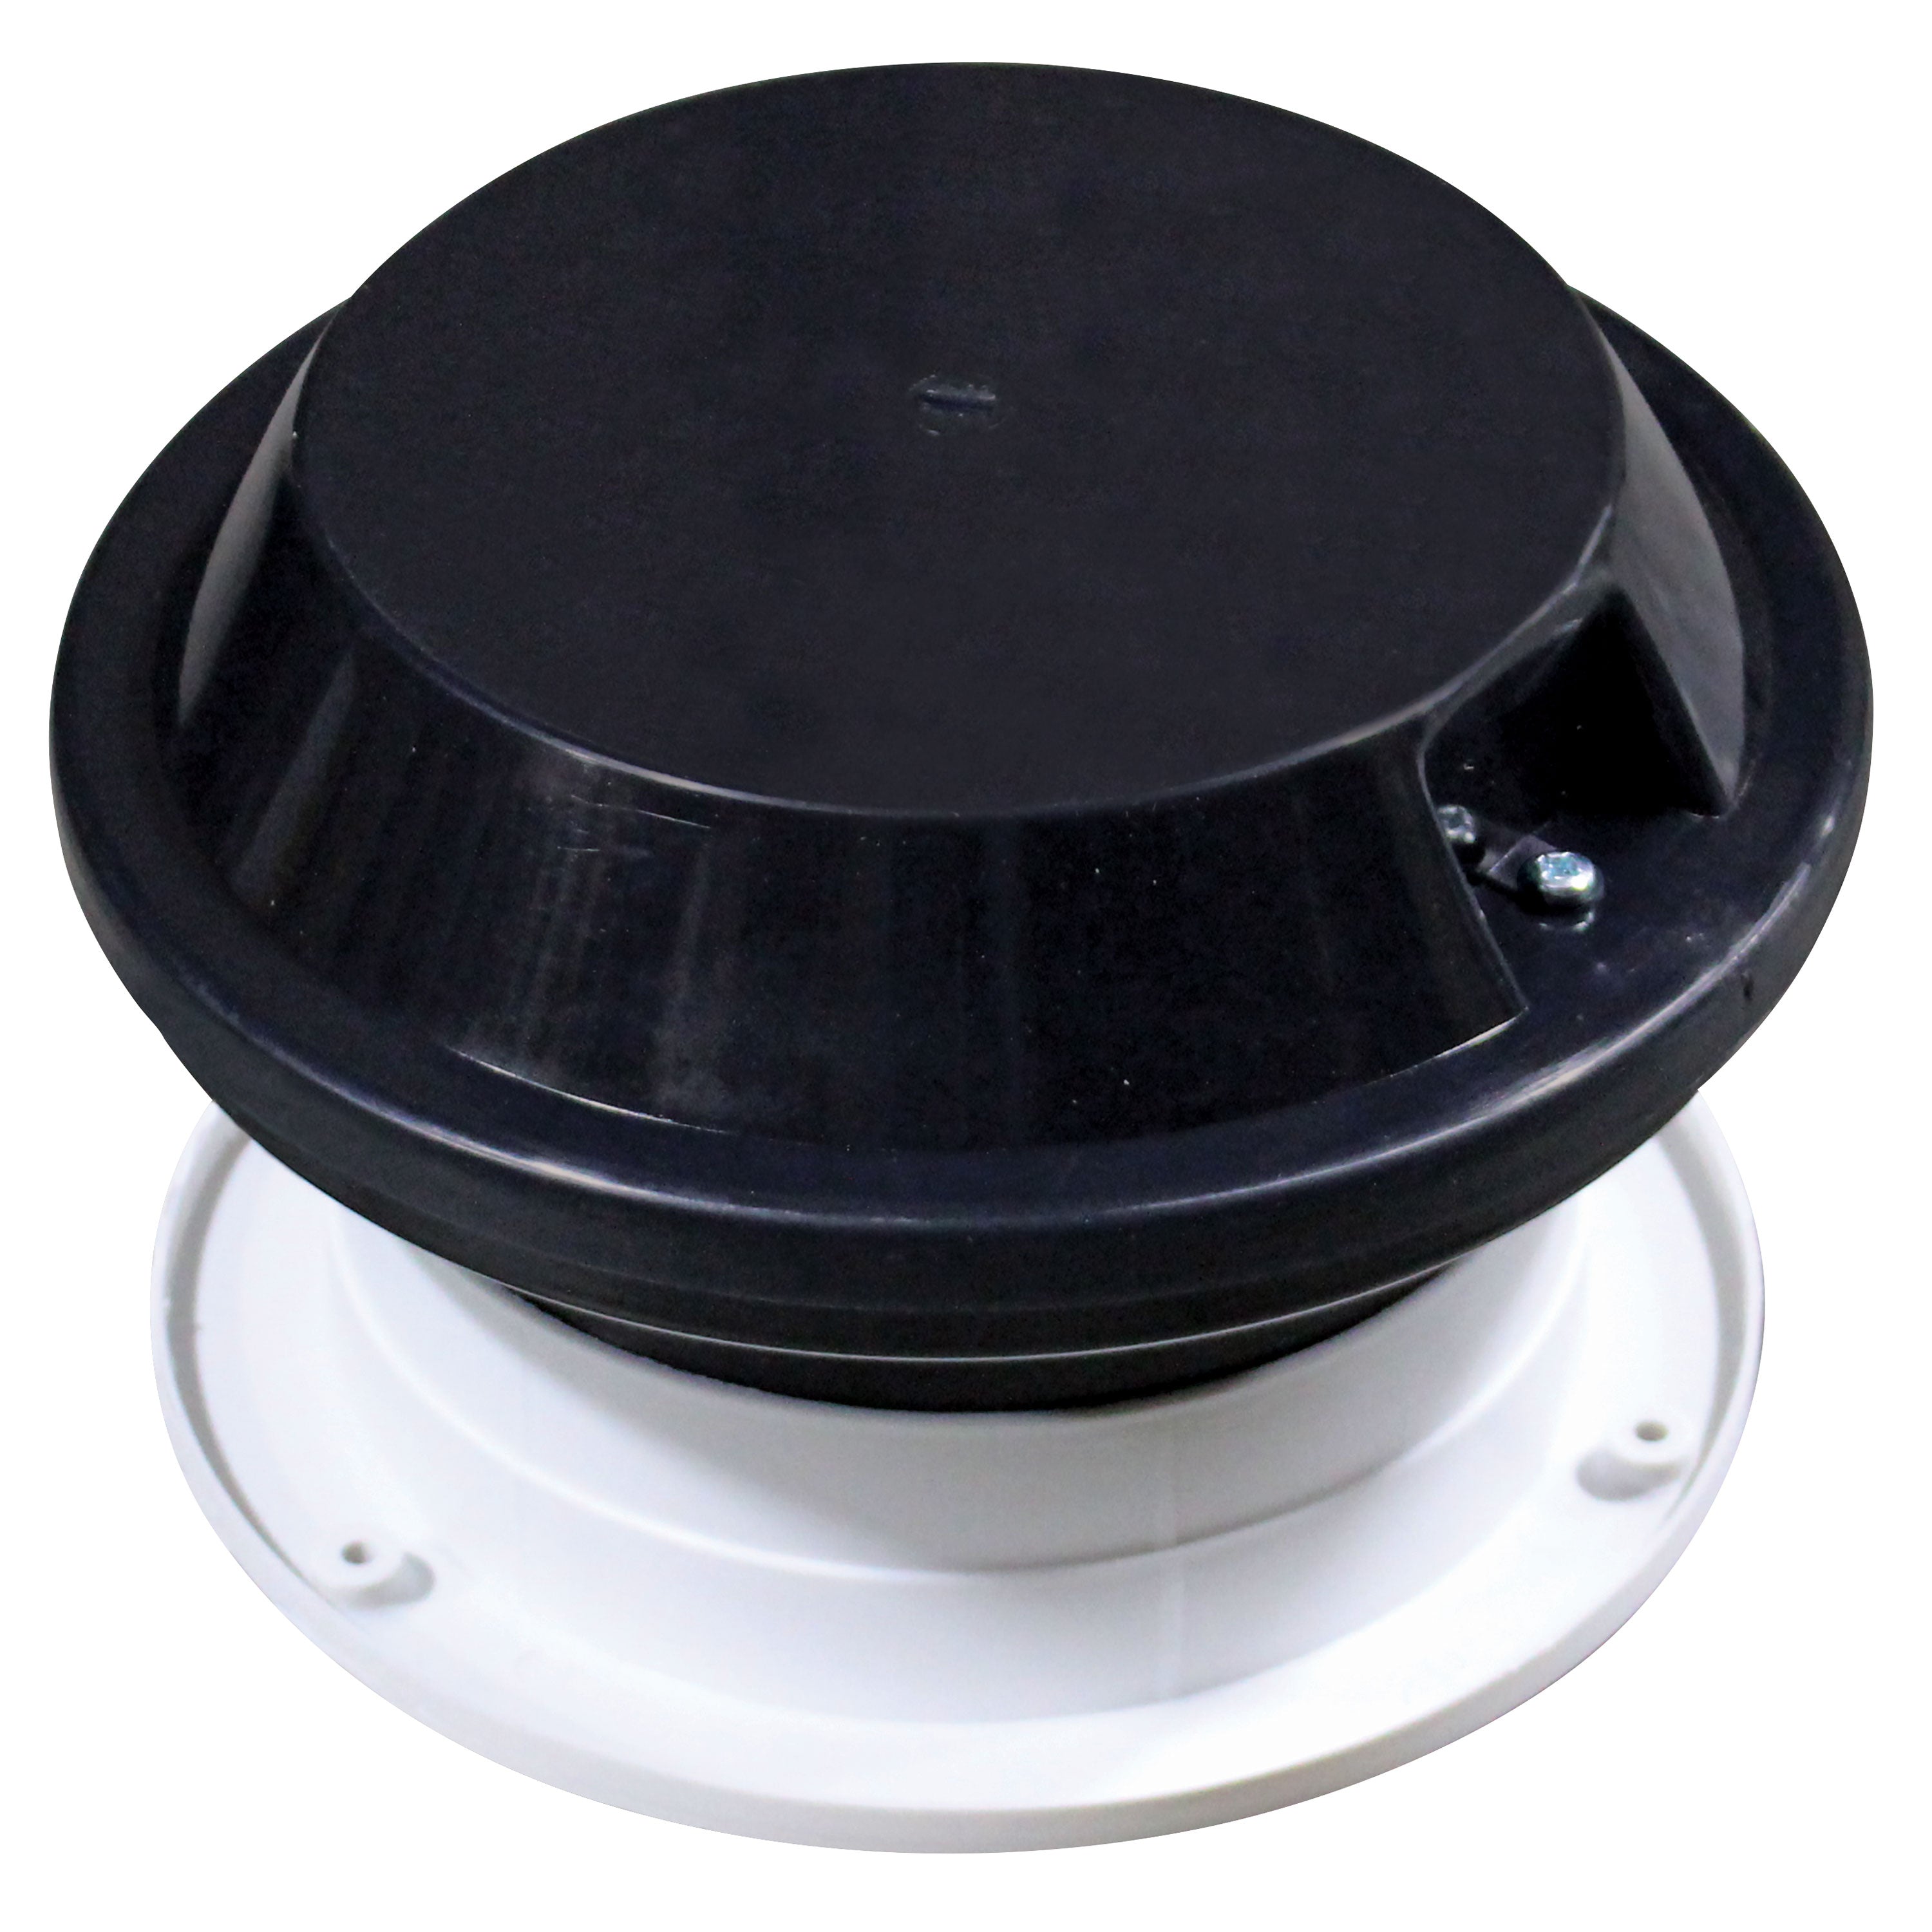 Ventline VP-543 Vanair Roof Vent with Colonial White Garnish 12V